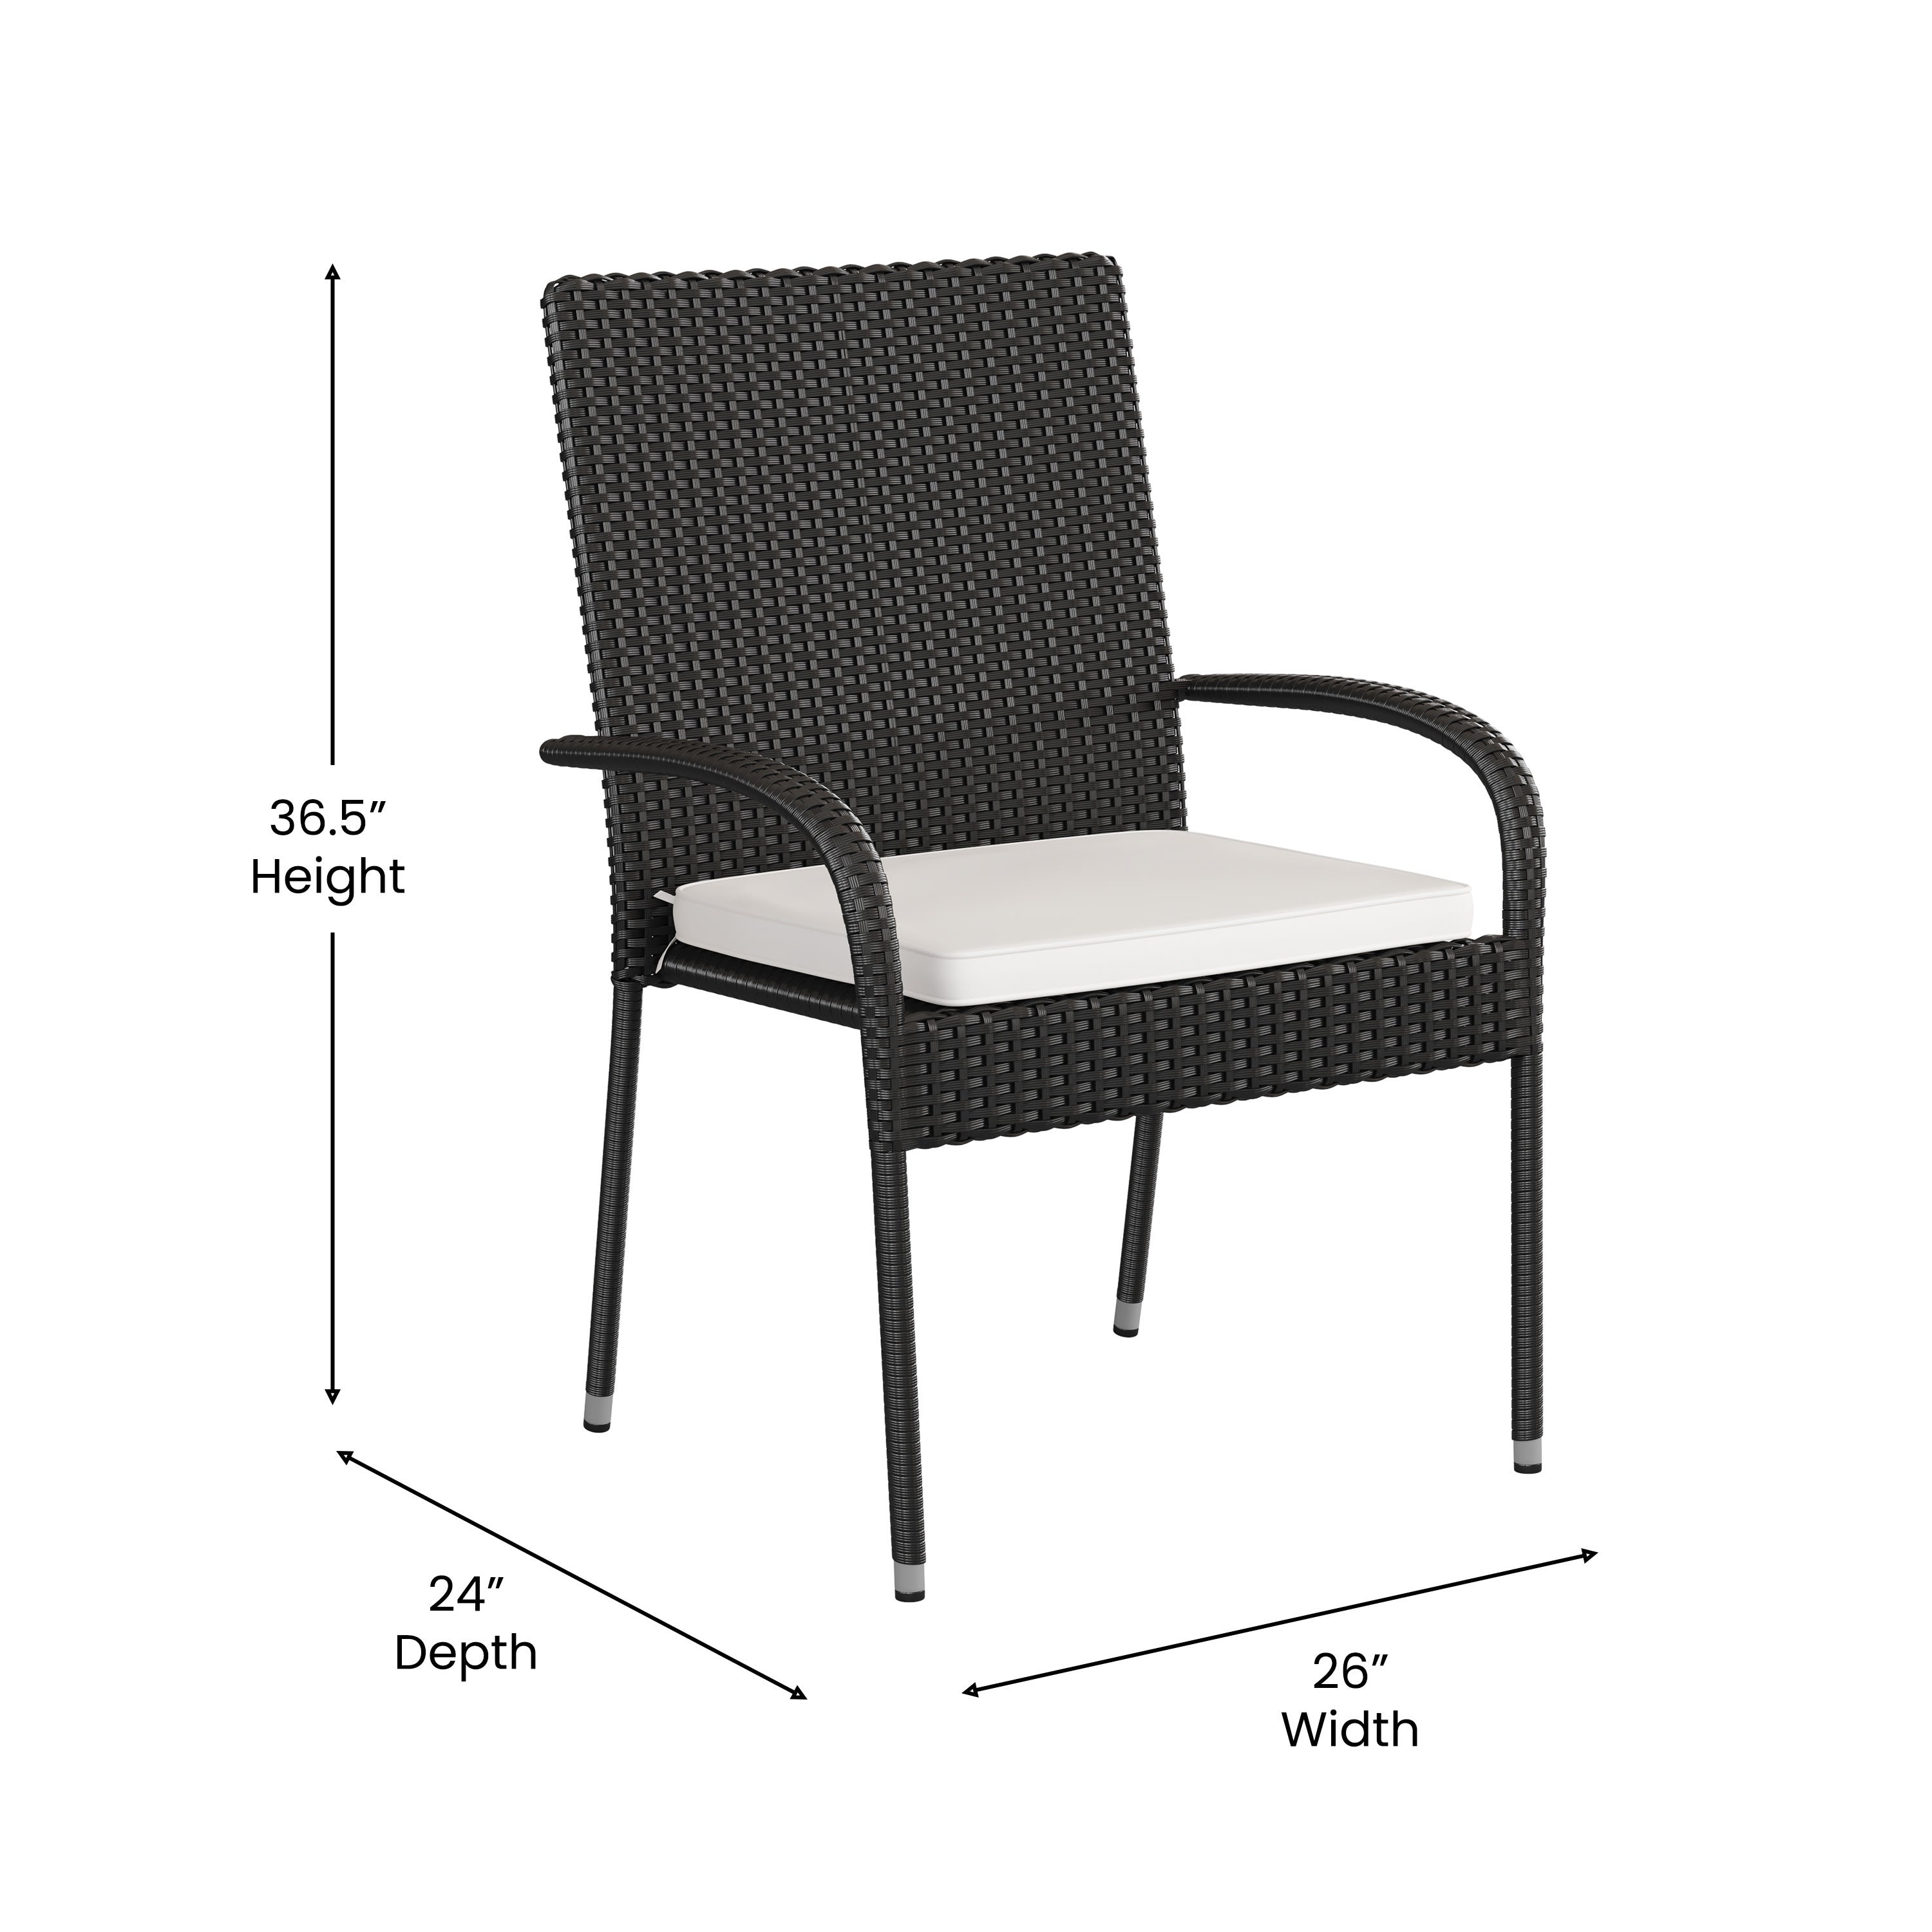 Maxim Set of 2 Stackable Indoor/Outdoor Wicker Dining Chairs with 1.25